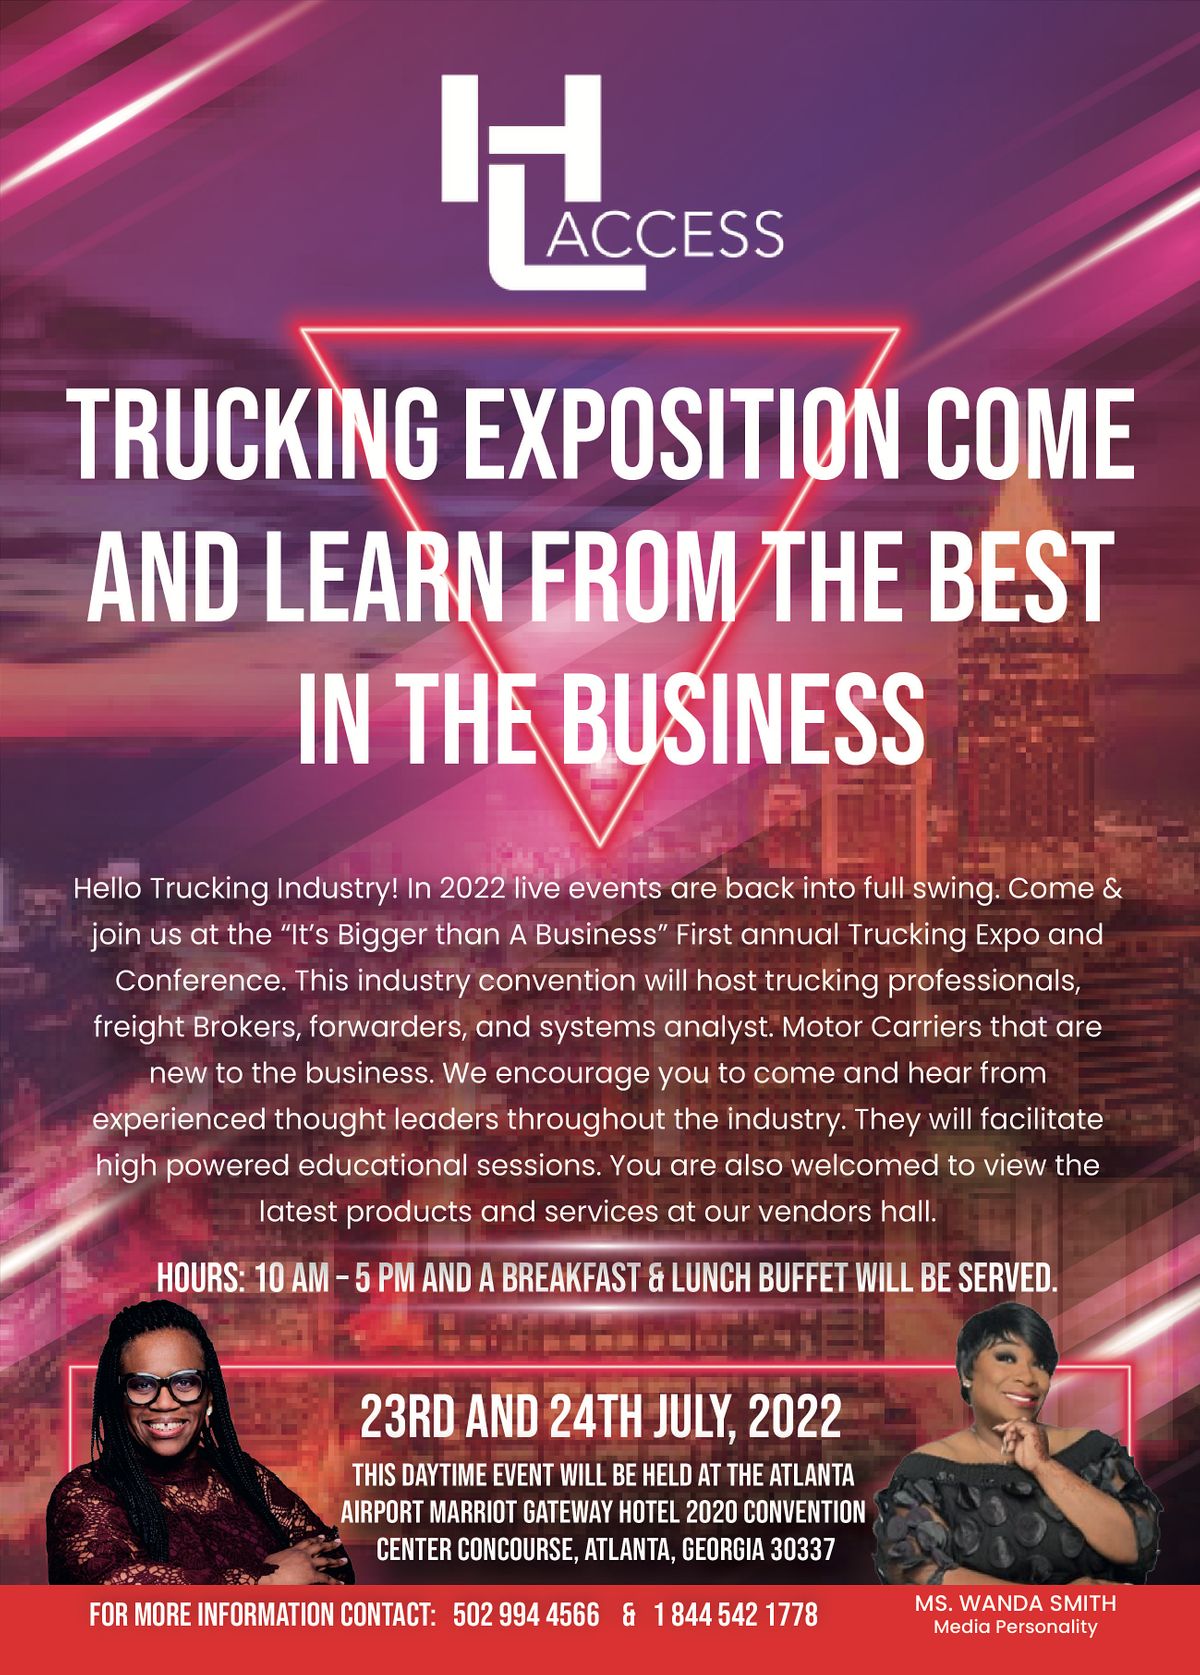 HL ACCESS Trucking Exposition & Conference